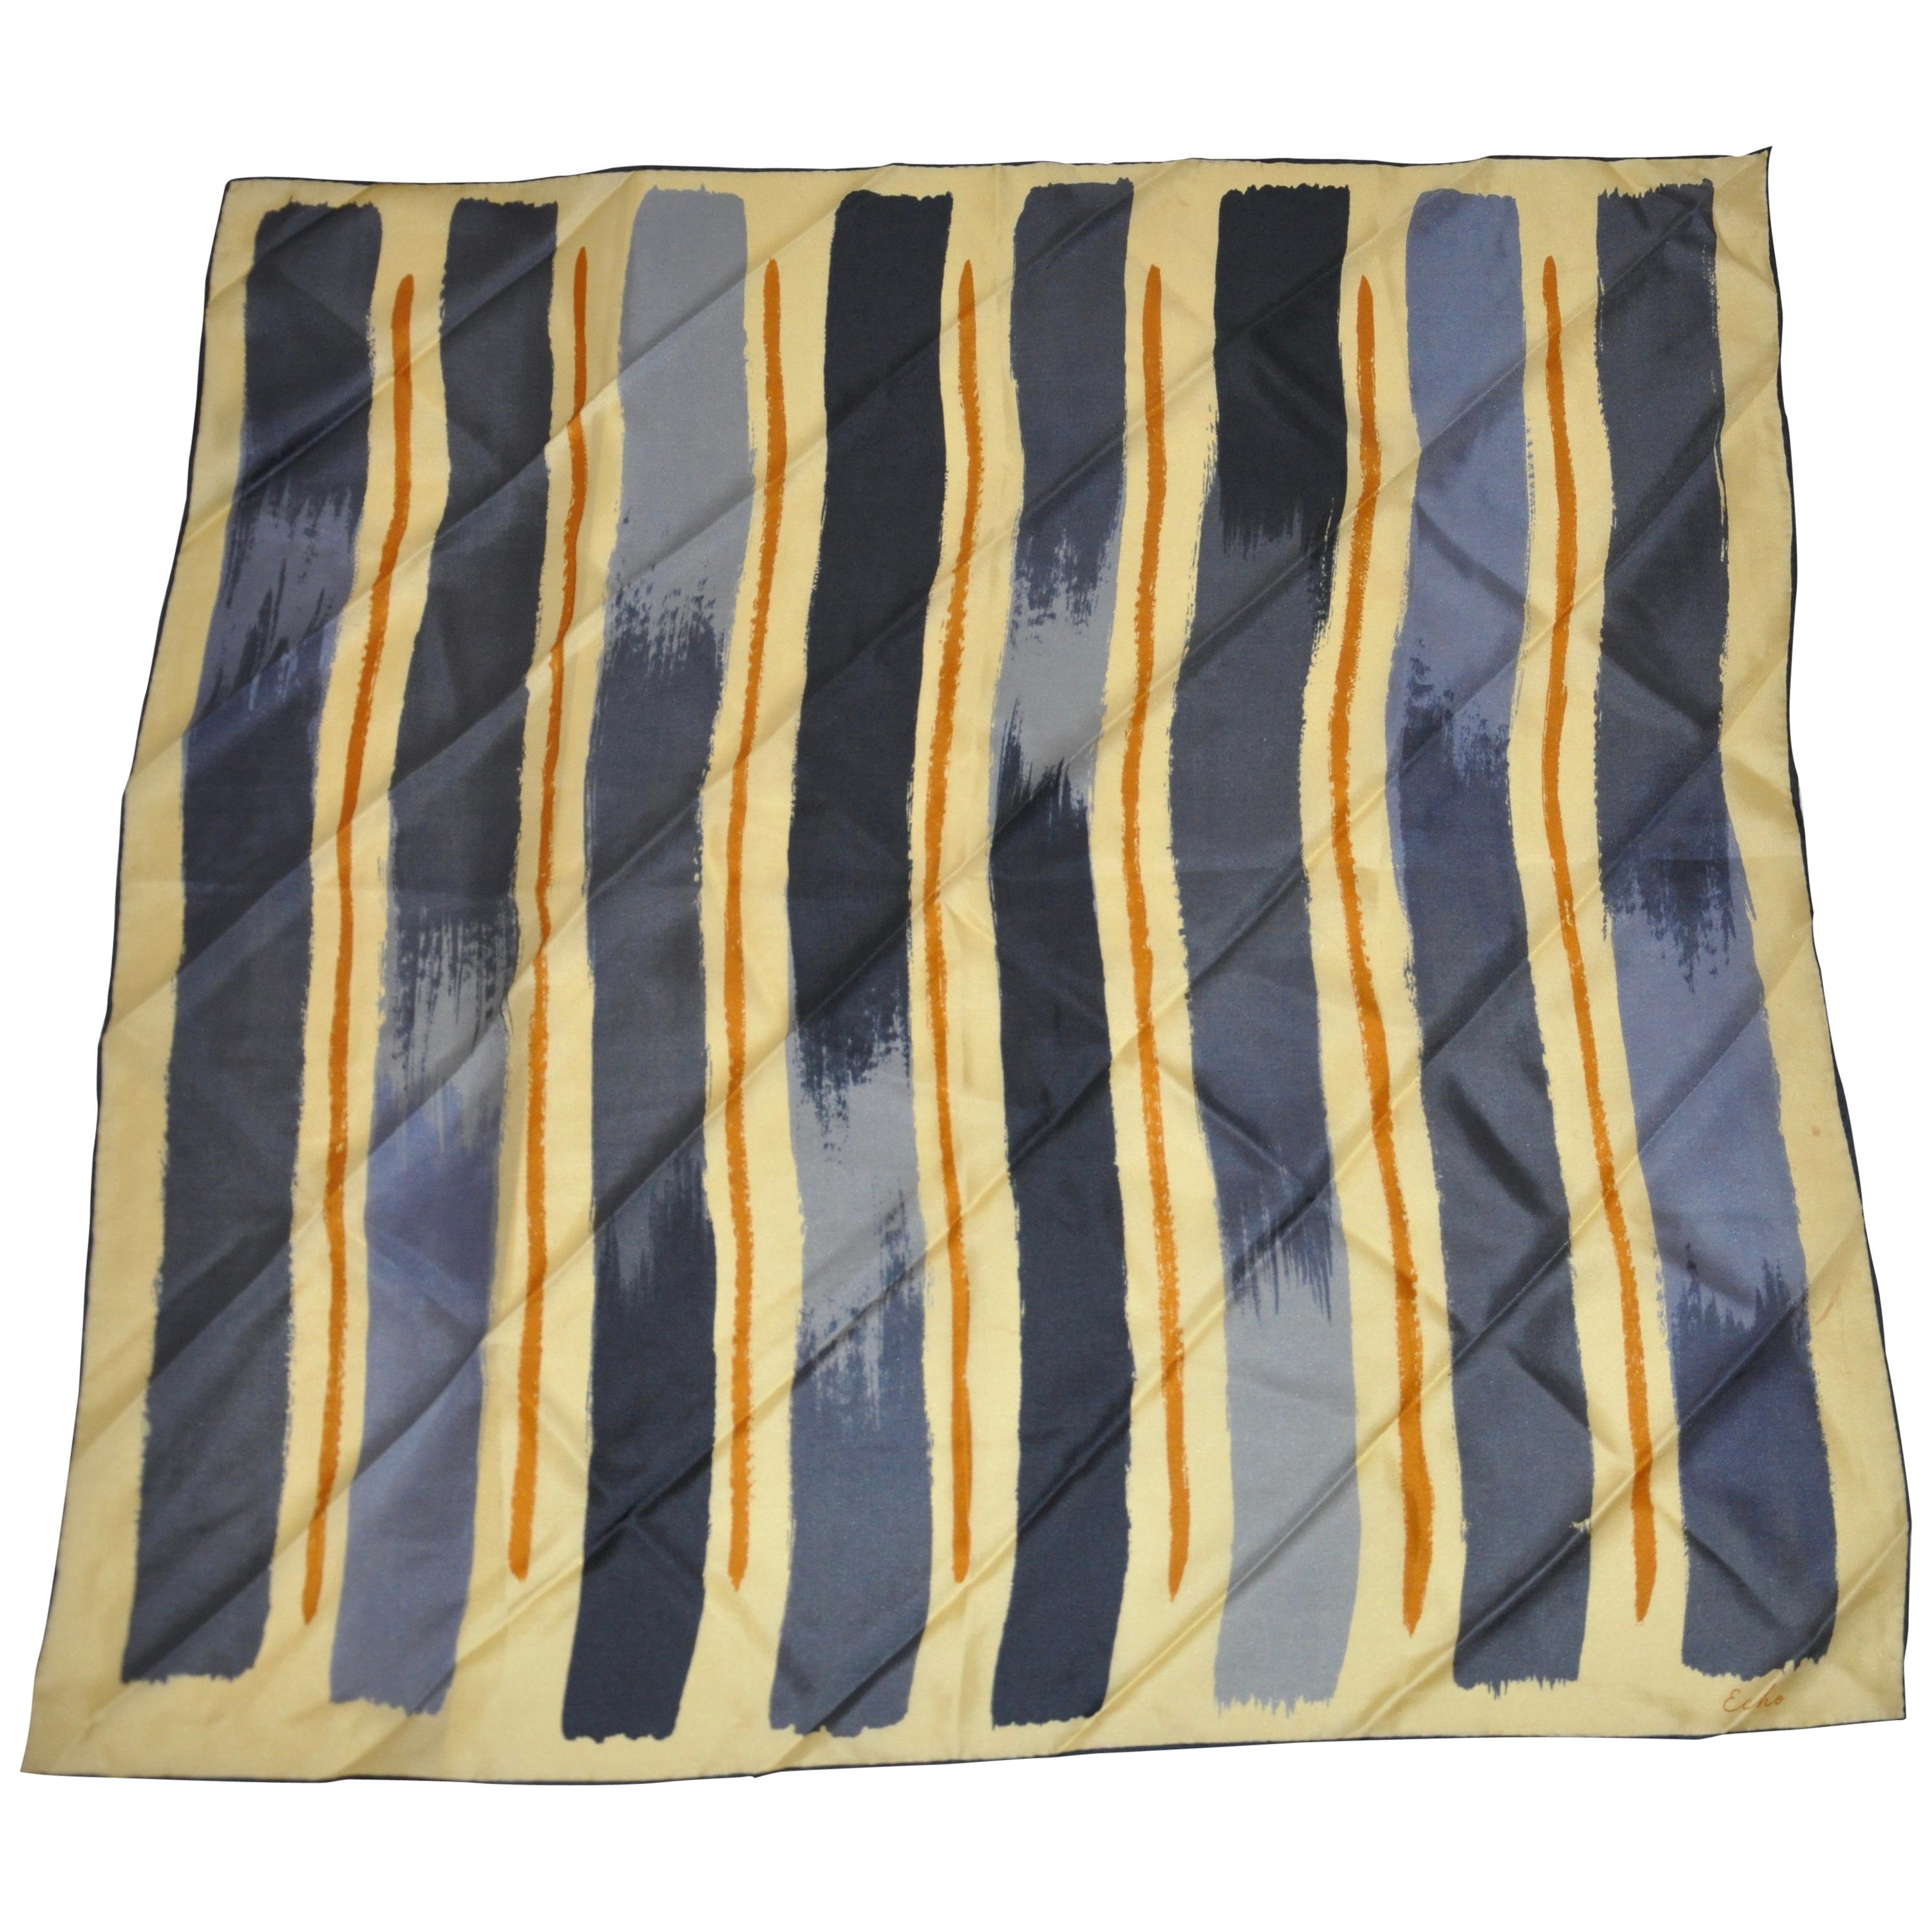 Vintage  Echo "Abstract  Strokes" of Gray, Charcoal & Black  Silk Scarf